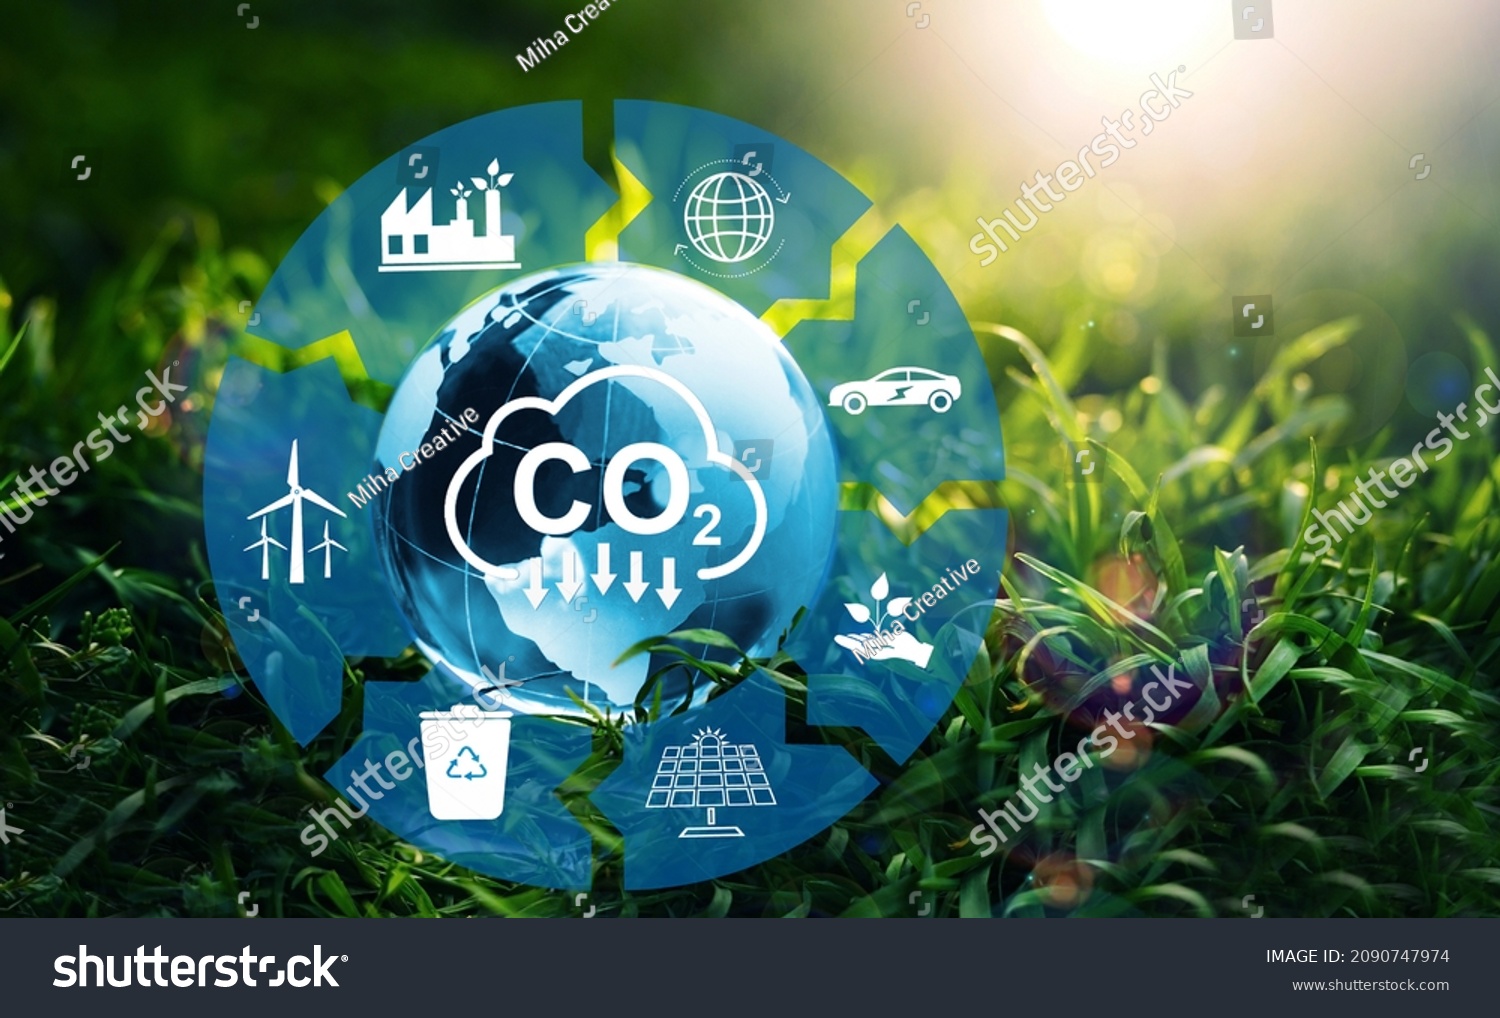 Reduce CO2 emission. Sustainable development concept. Renewable energy-based green businesses can limit climate change and global warming.  #2090747974